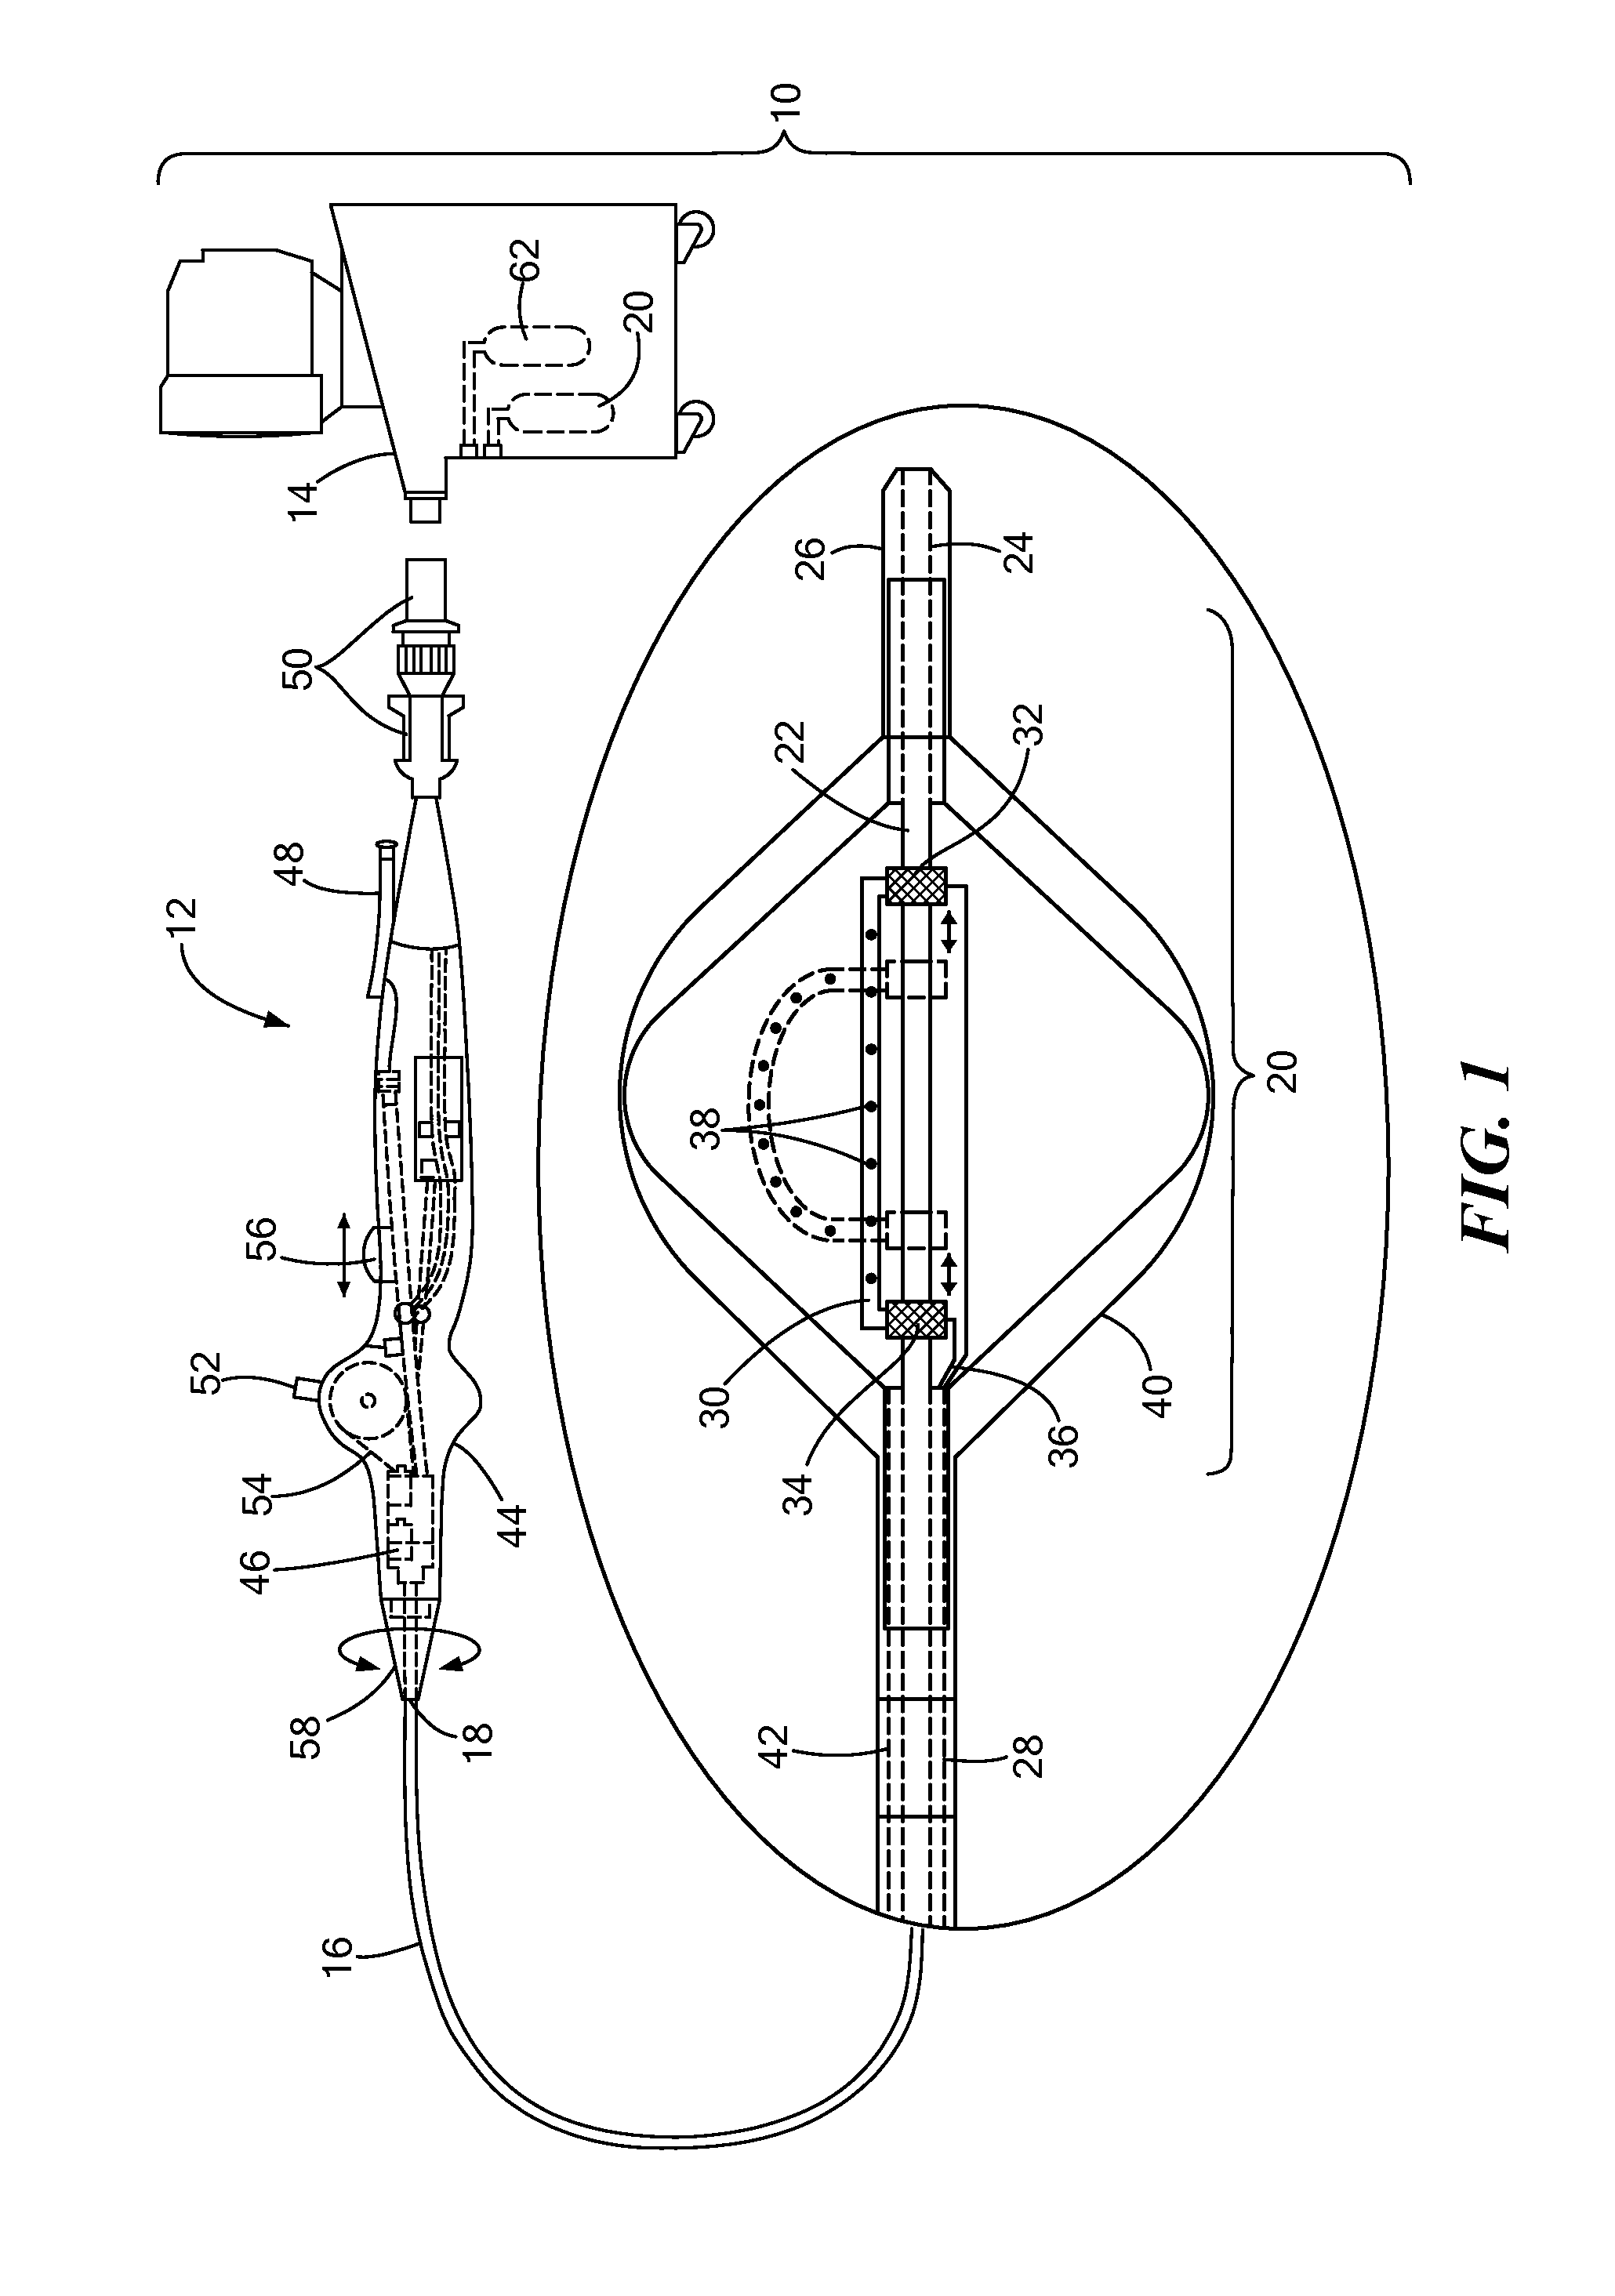 Balloon catheter with deformable fluid delivery conduit